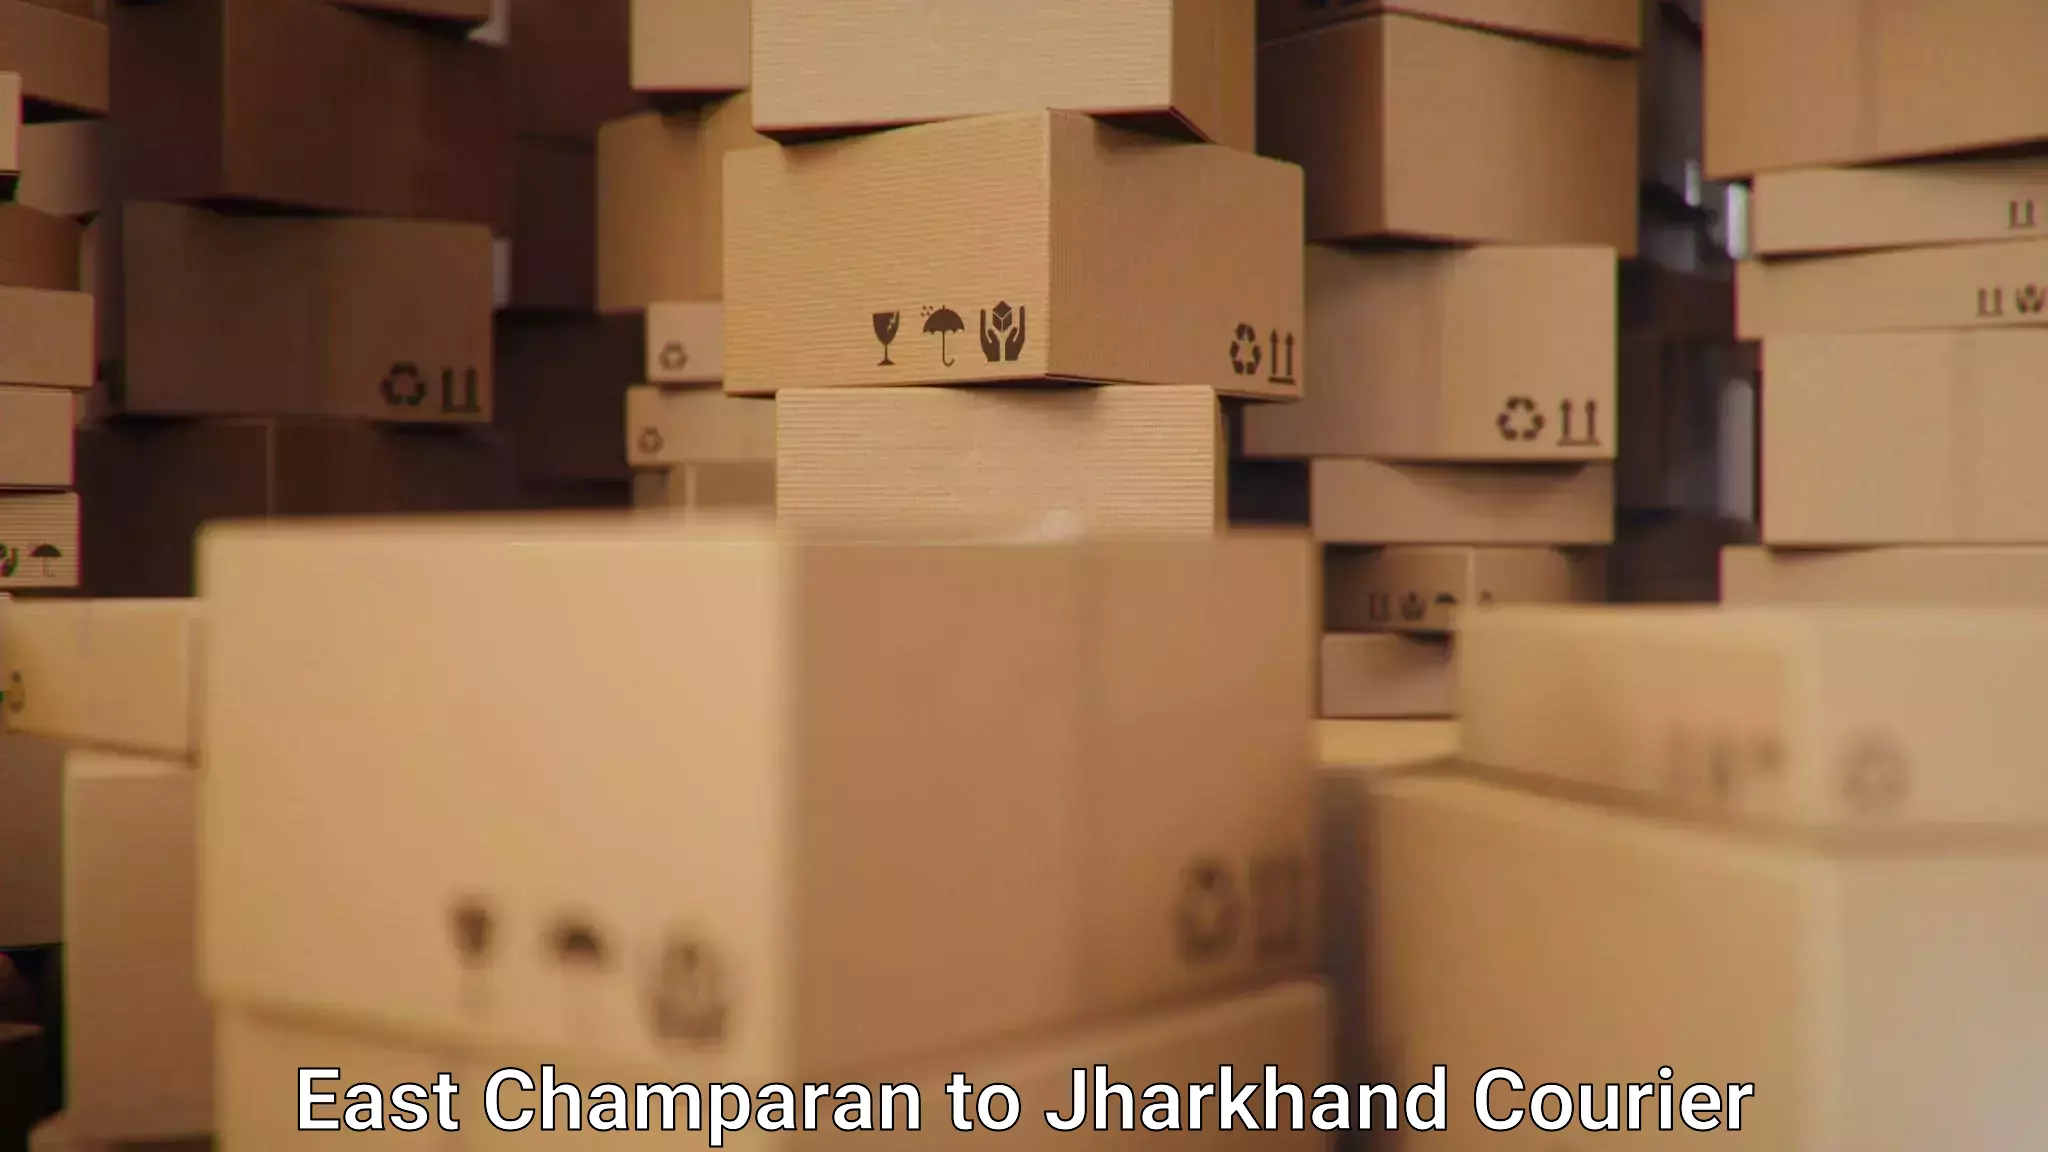 Professional courier handling East Champaran to Gobindpur